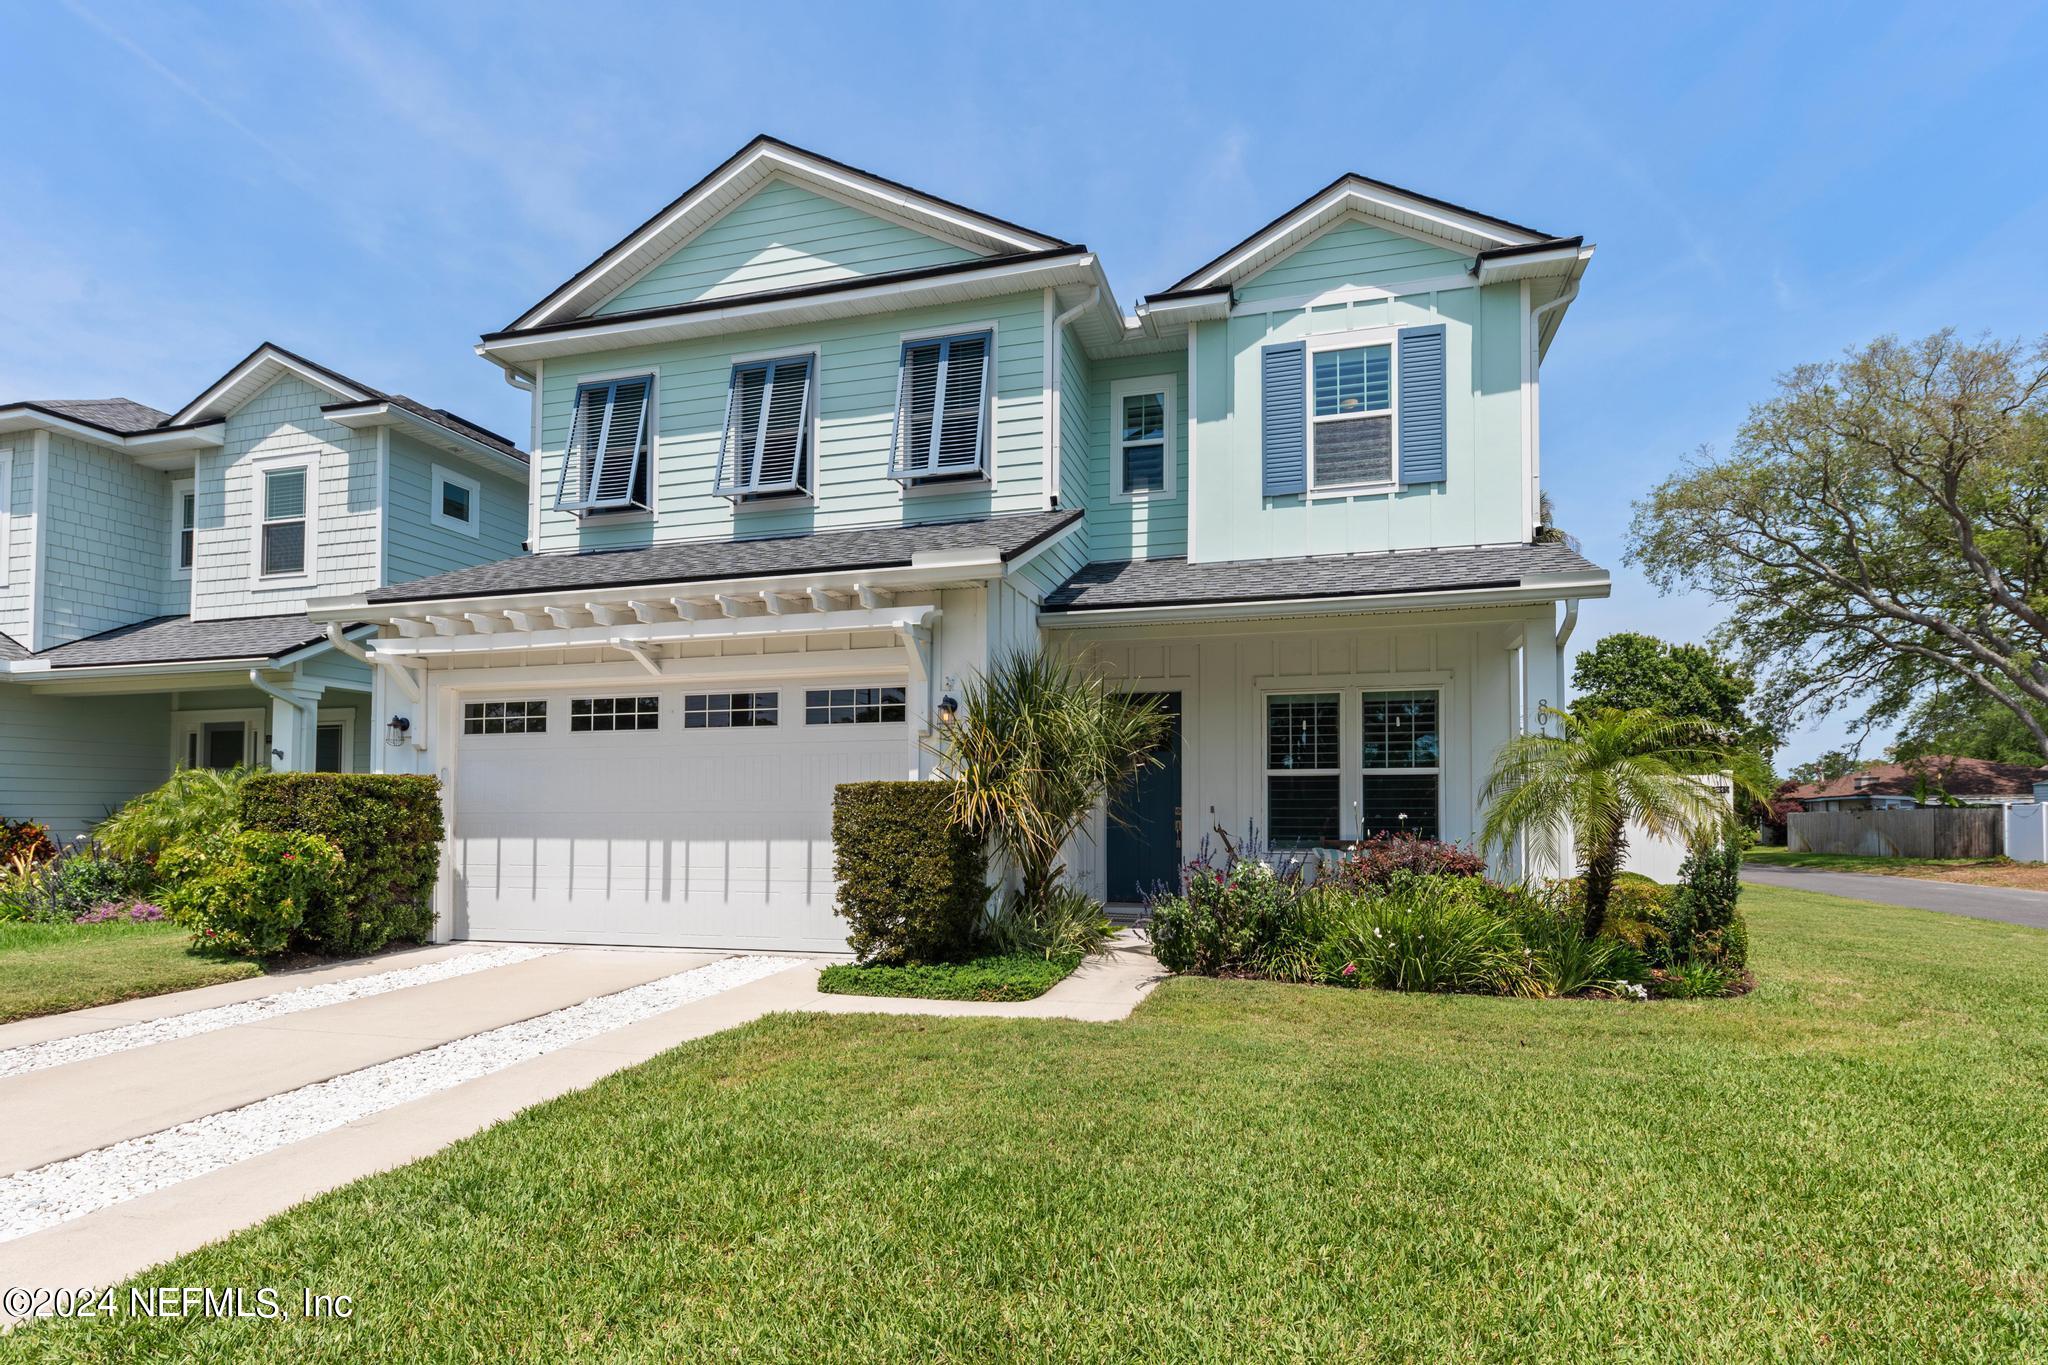 Jacksonville Beach, FL home for sale located at 801 15th Avenue S, Jacksonville Beach, FL 32250